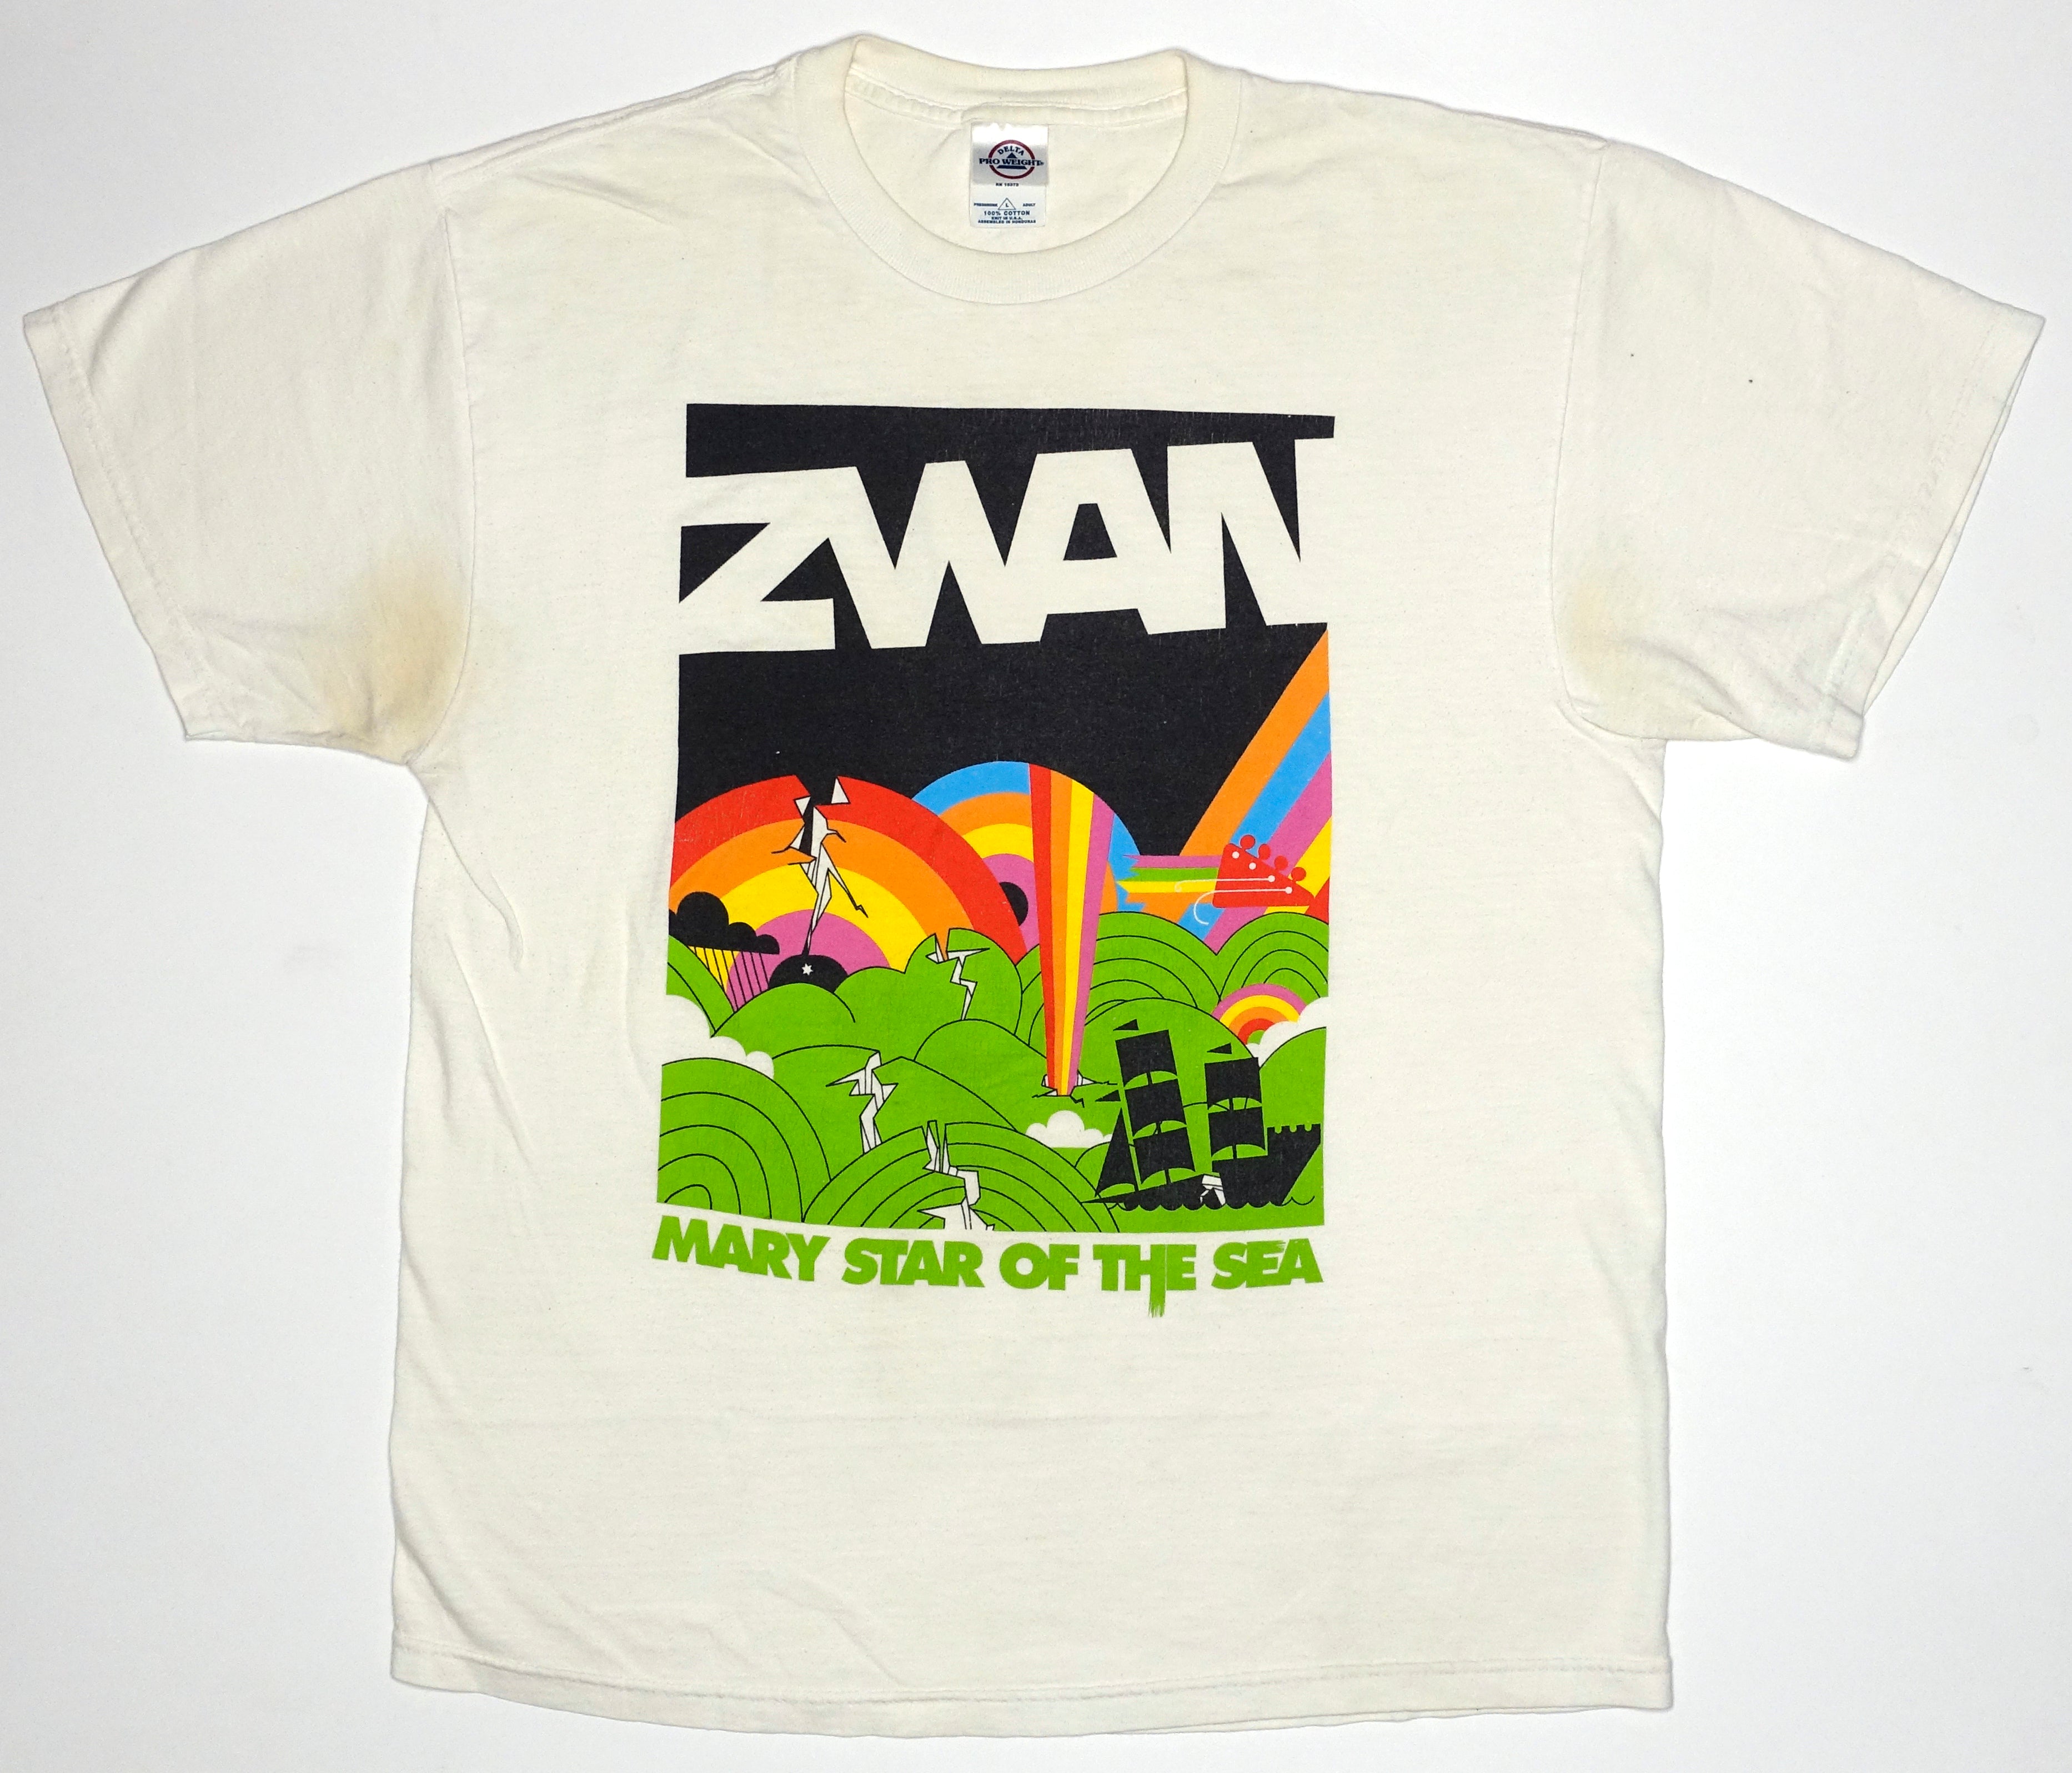 Zwan - Mary Star Of The Sea 2003 Tour Shirt Size Large